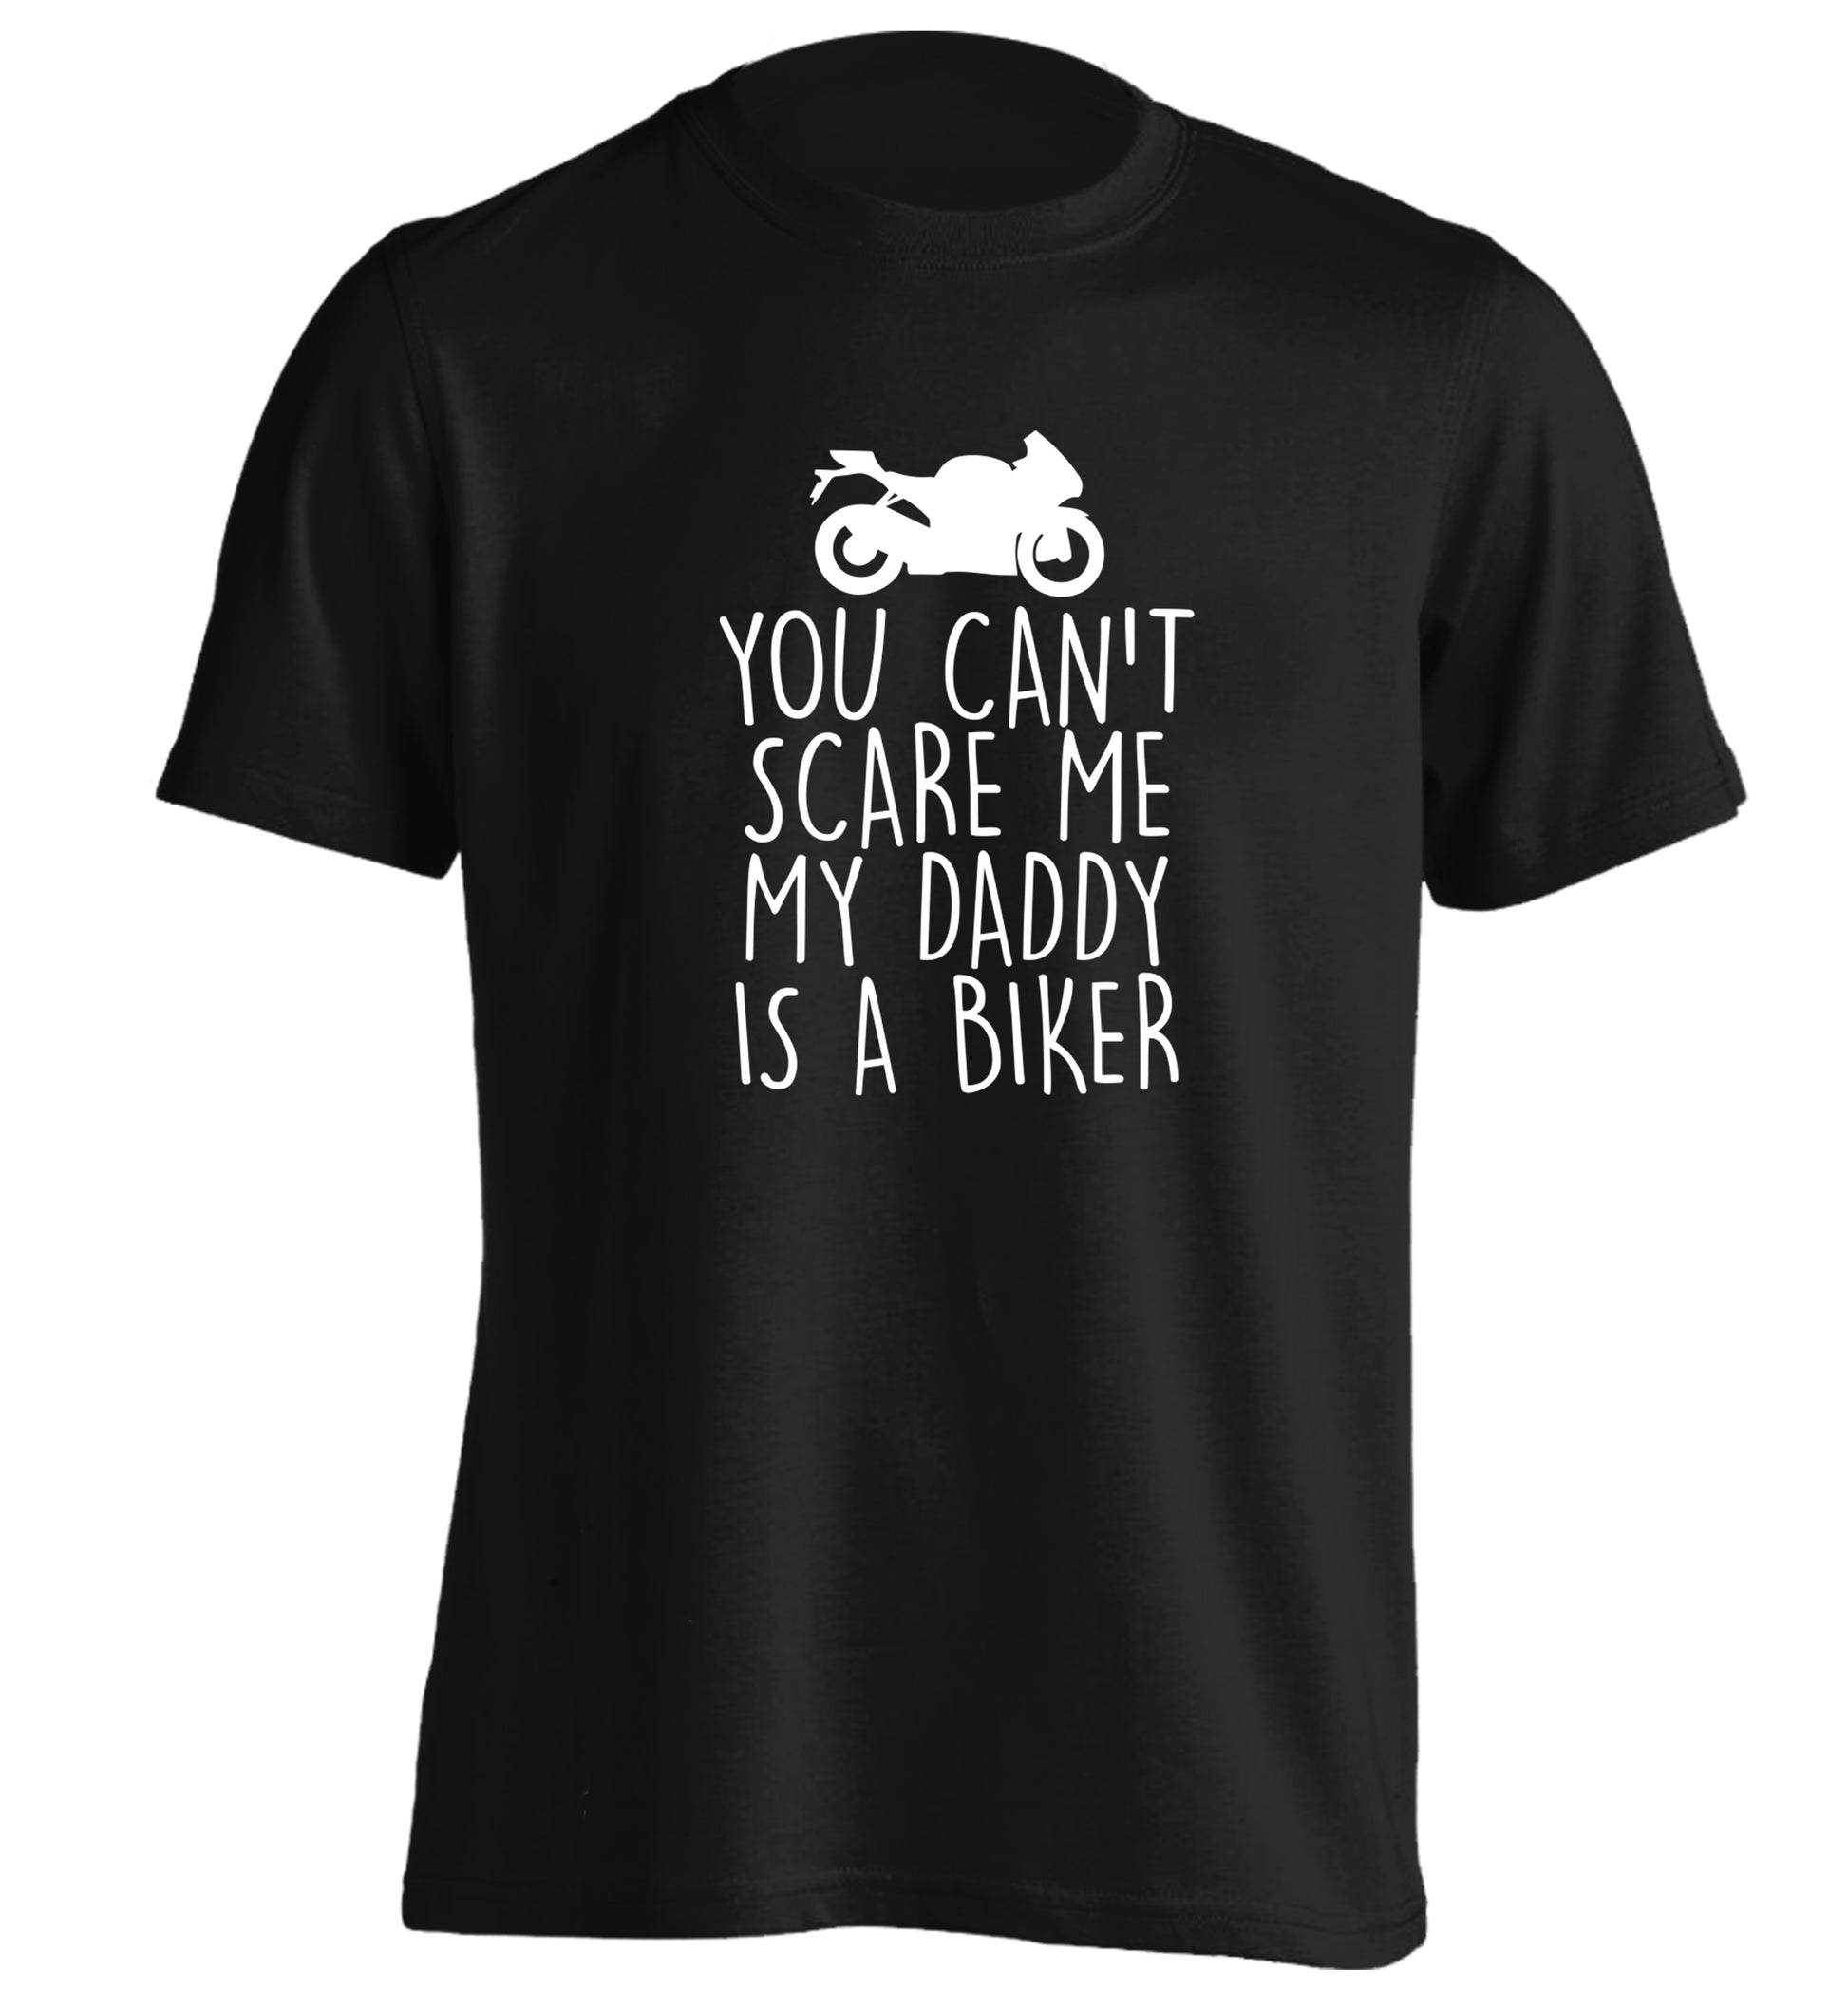 You can't scare me my daddy is a biker adults unisex black Tshirt 2XL